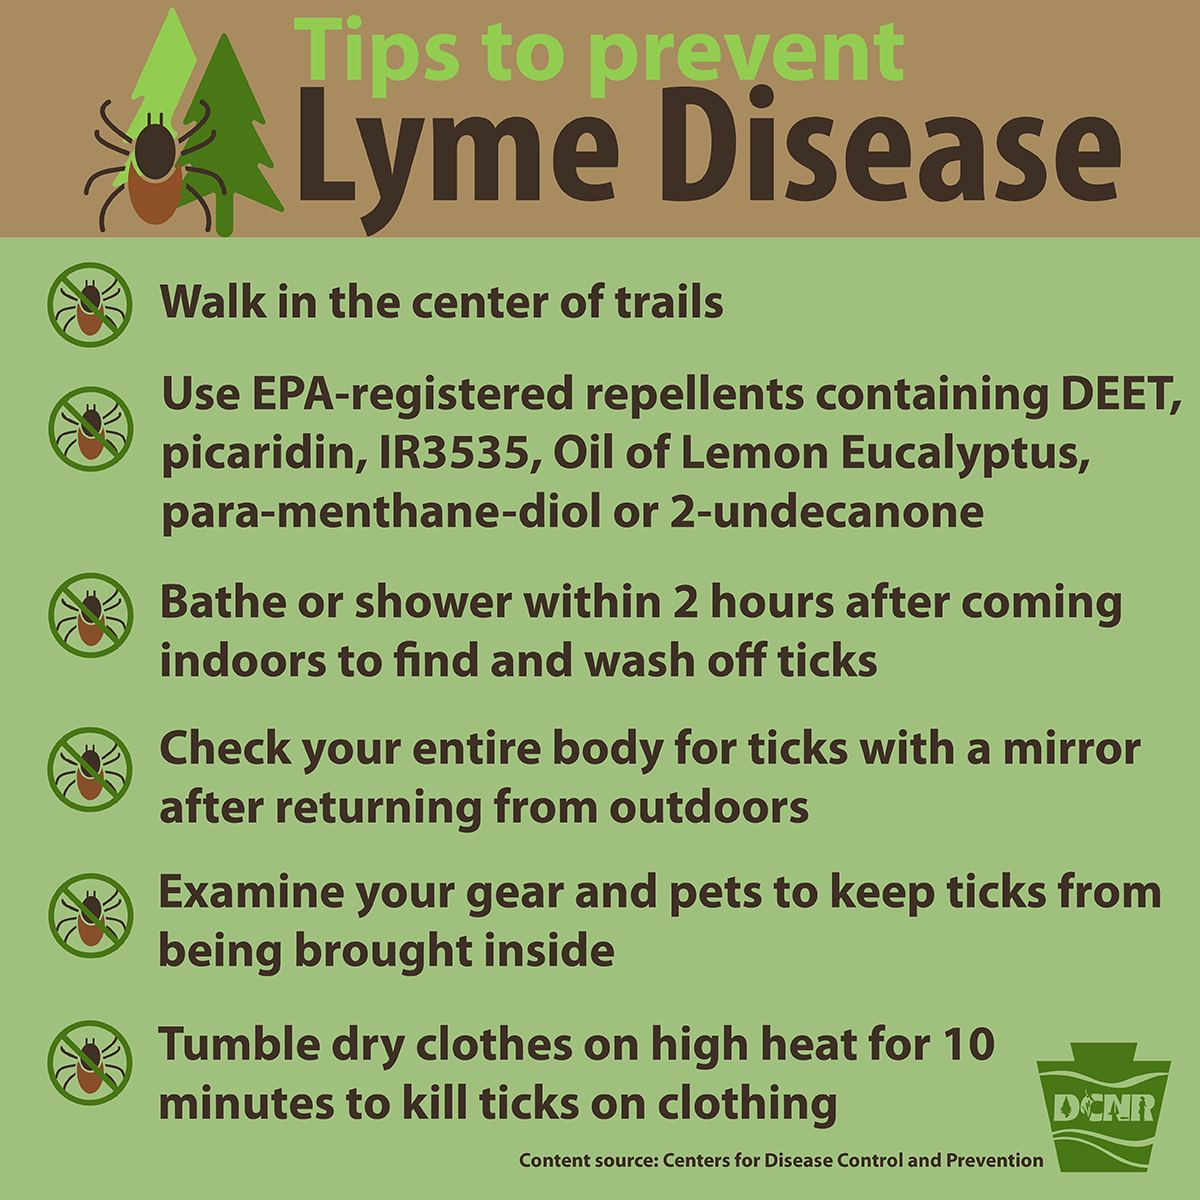 Don’t forget to check yourself and pets for ticks after spending time in #PaStateParks and #PaStateForests, especially now when ticks can be about the size of a poppy seed -- making them difficult to find! Learn more ➡ bit.ly/2pLHaRO. #LymeDiseaseAwarenessMonth